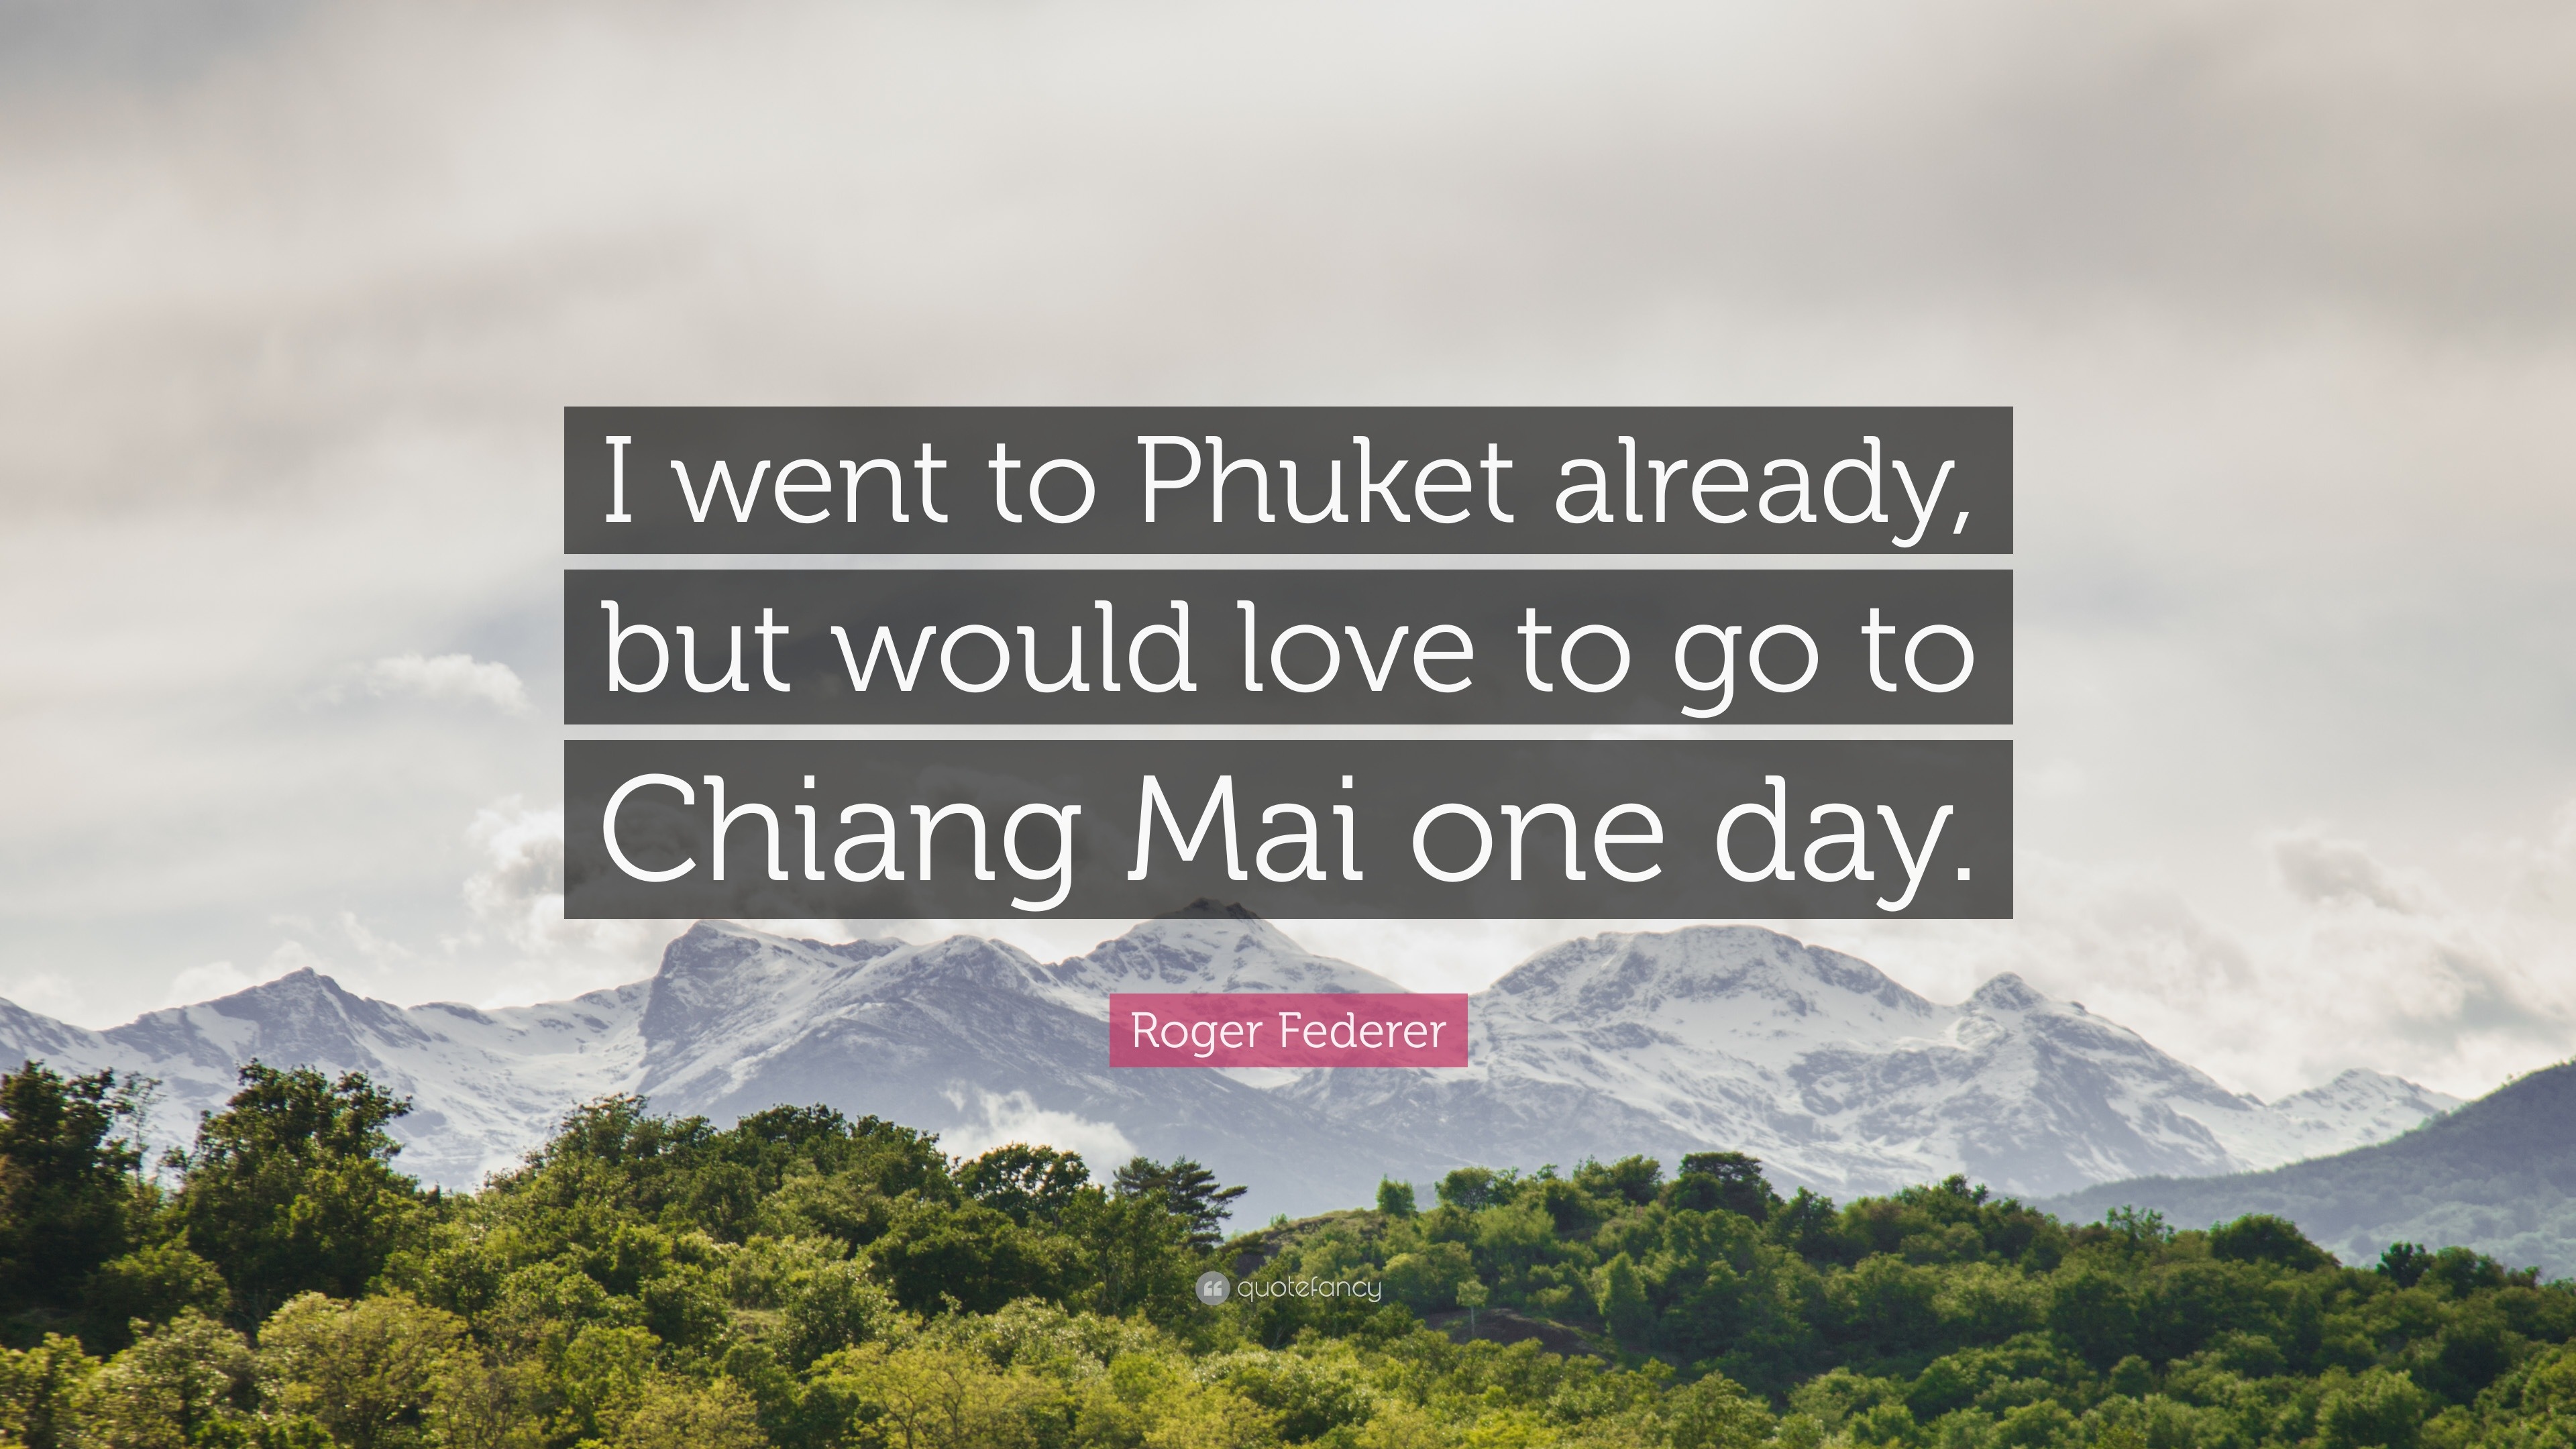 Roger Federer Quote: “I went to Phuket already, but would love to go to  Chiang Mai